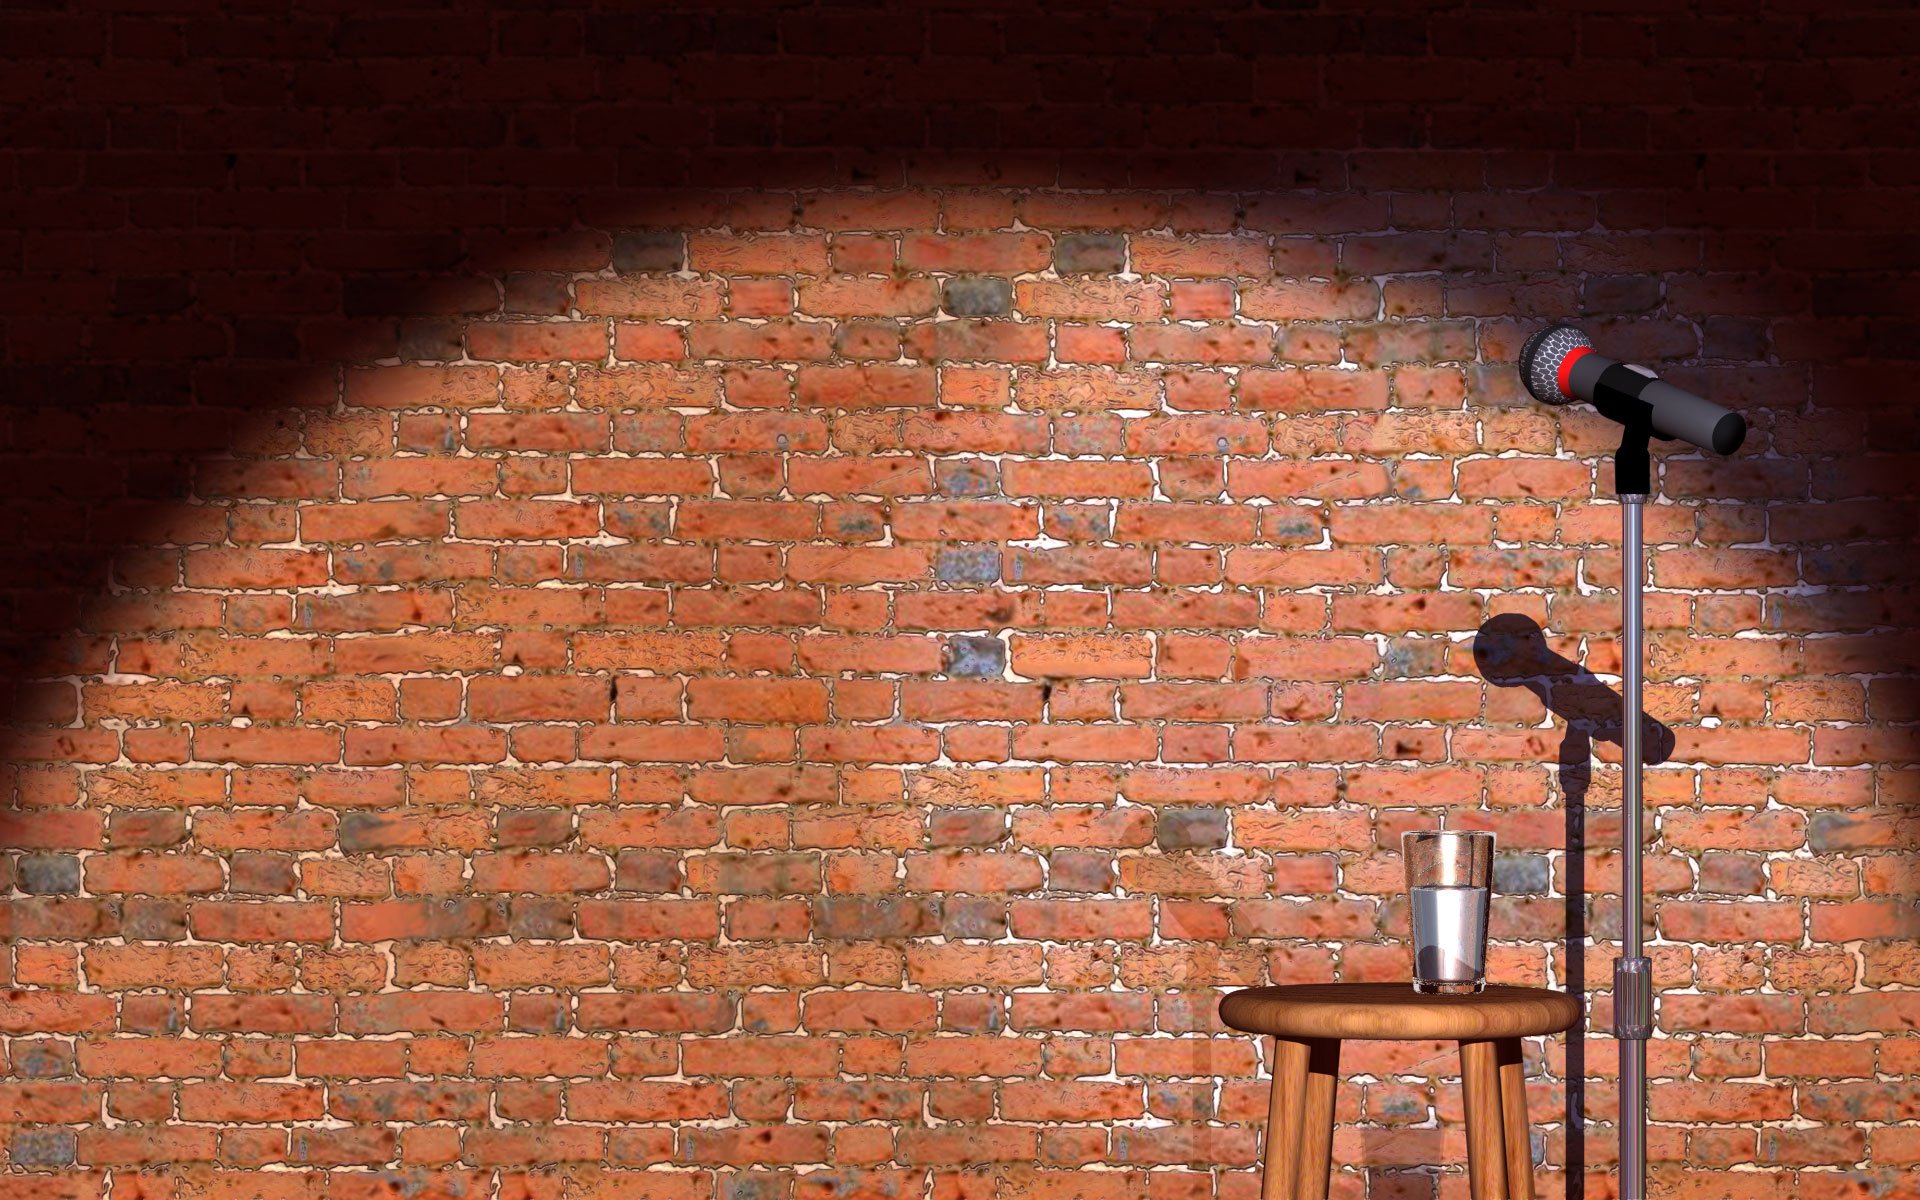 Stand Up Comedy Background wallpaper 242644